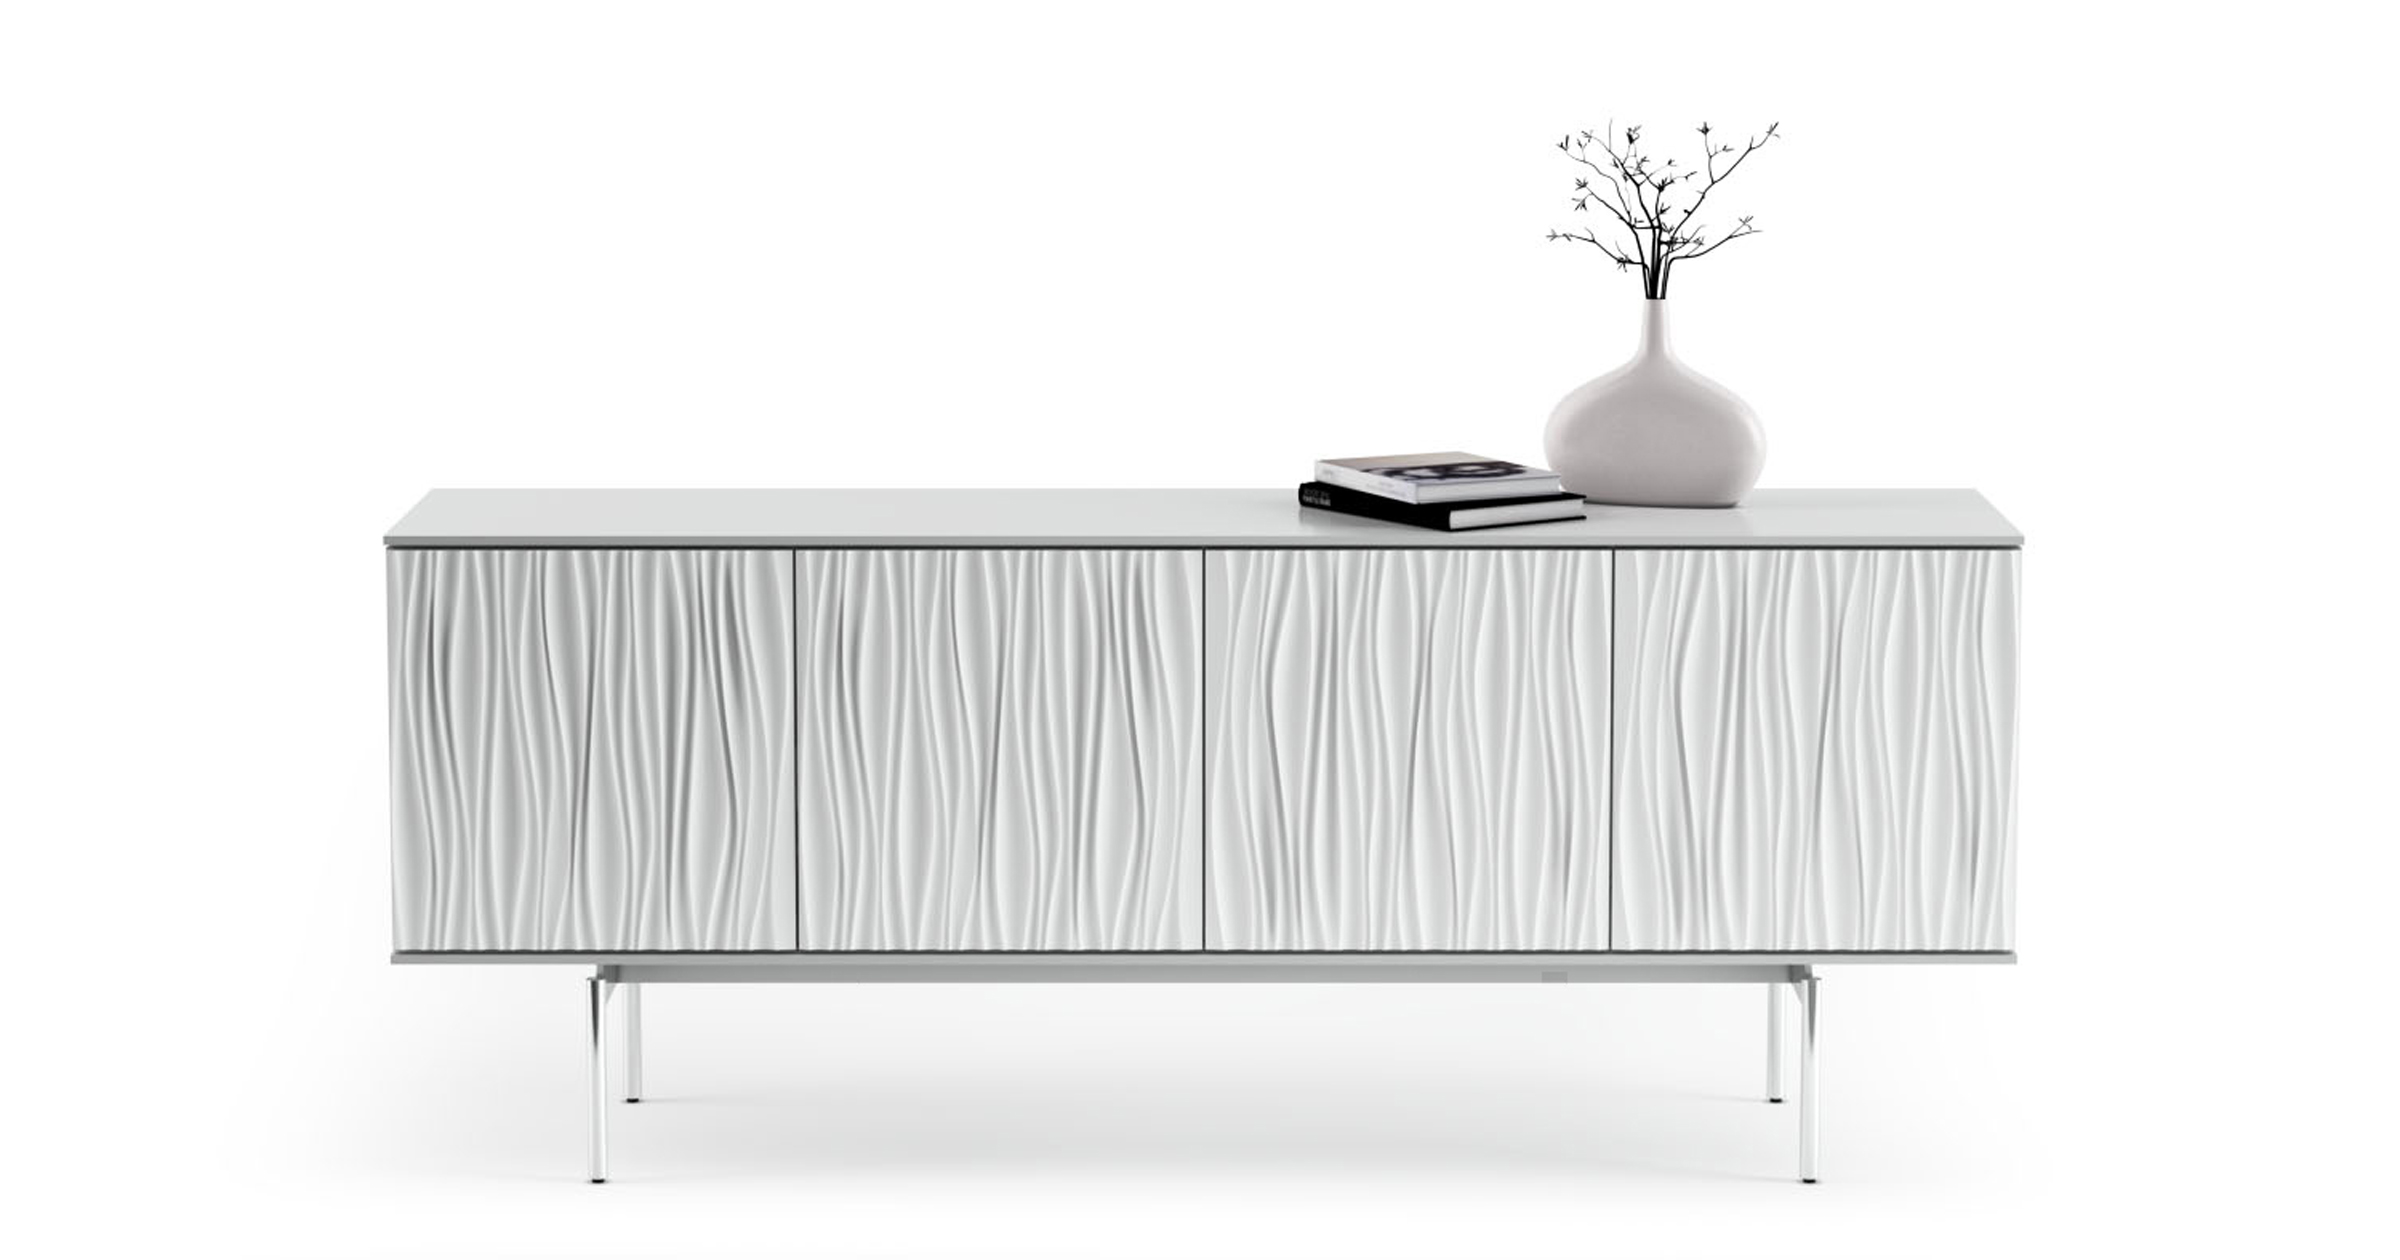 Tanami four-paneled Credenza in a Satin White finish from BDI